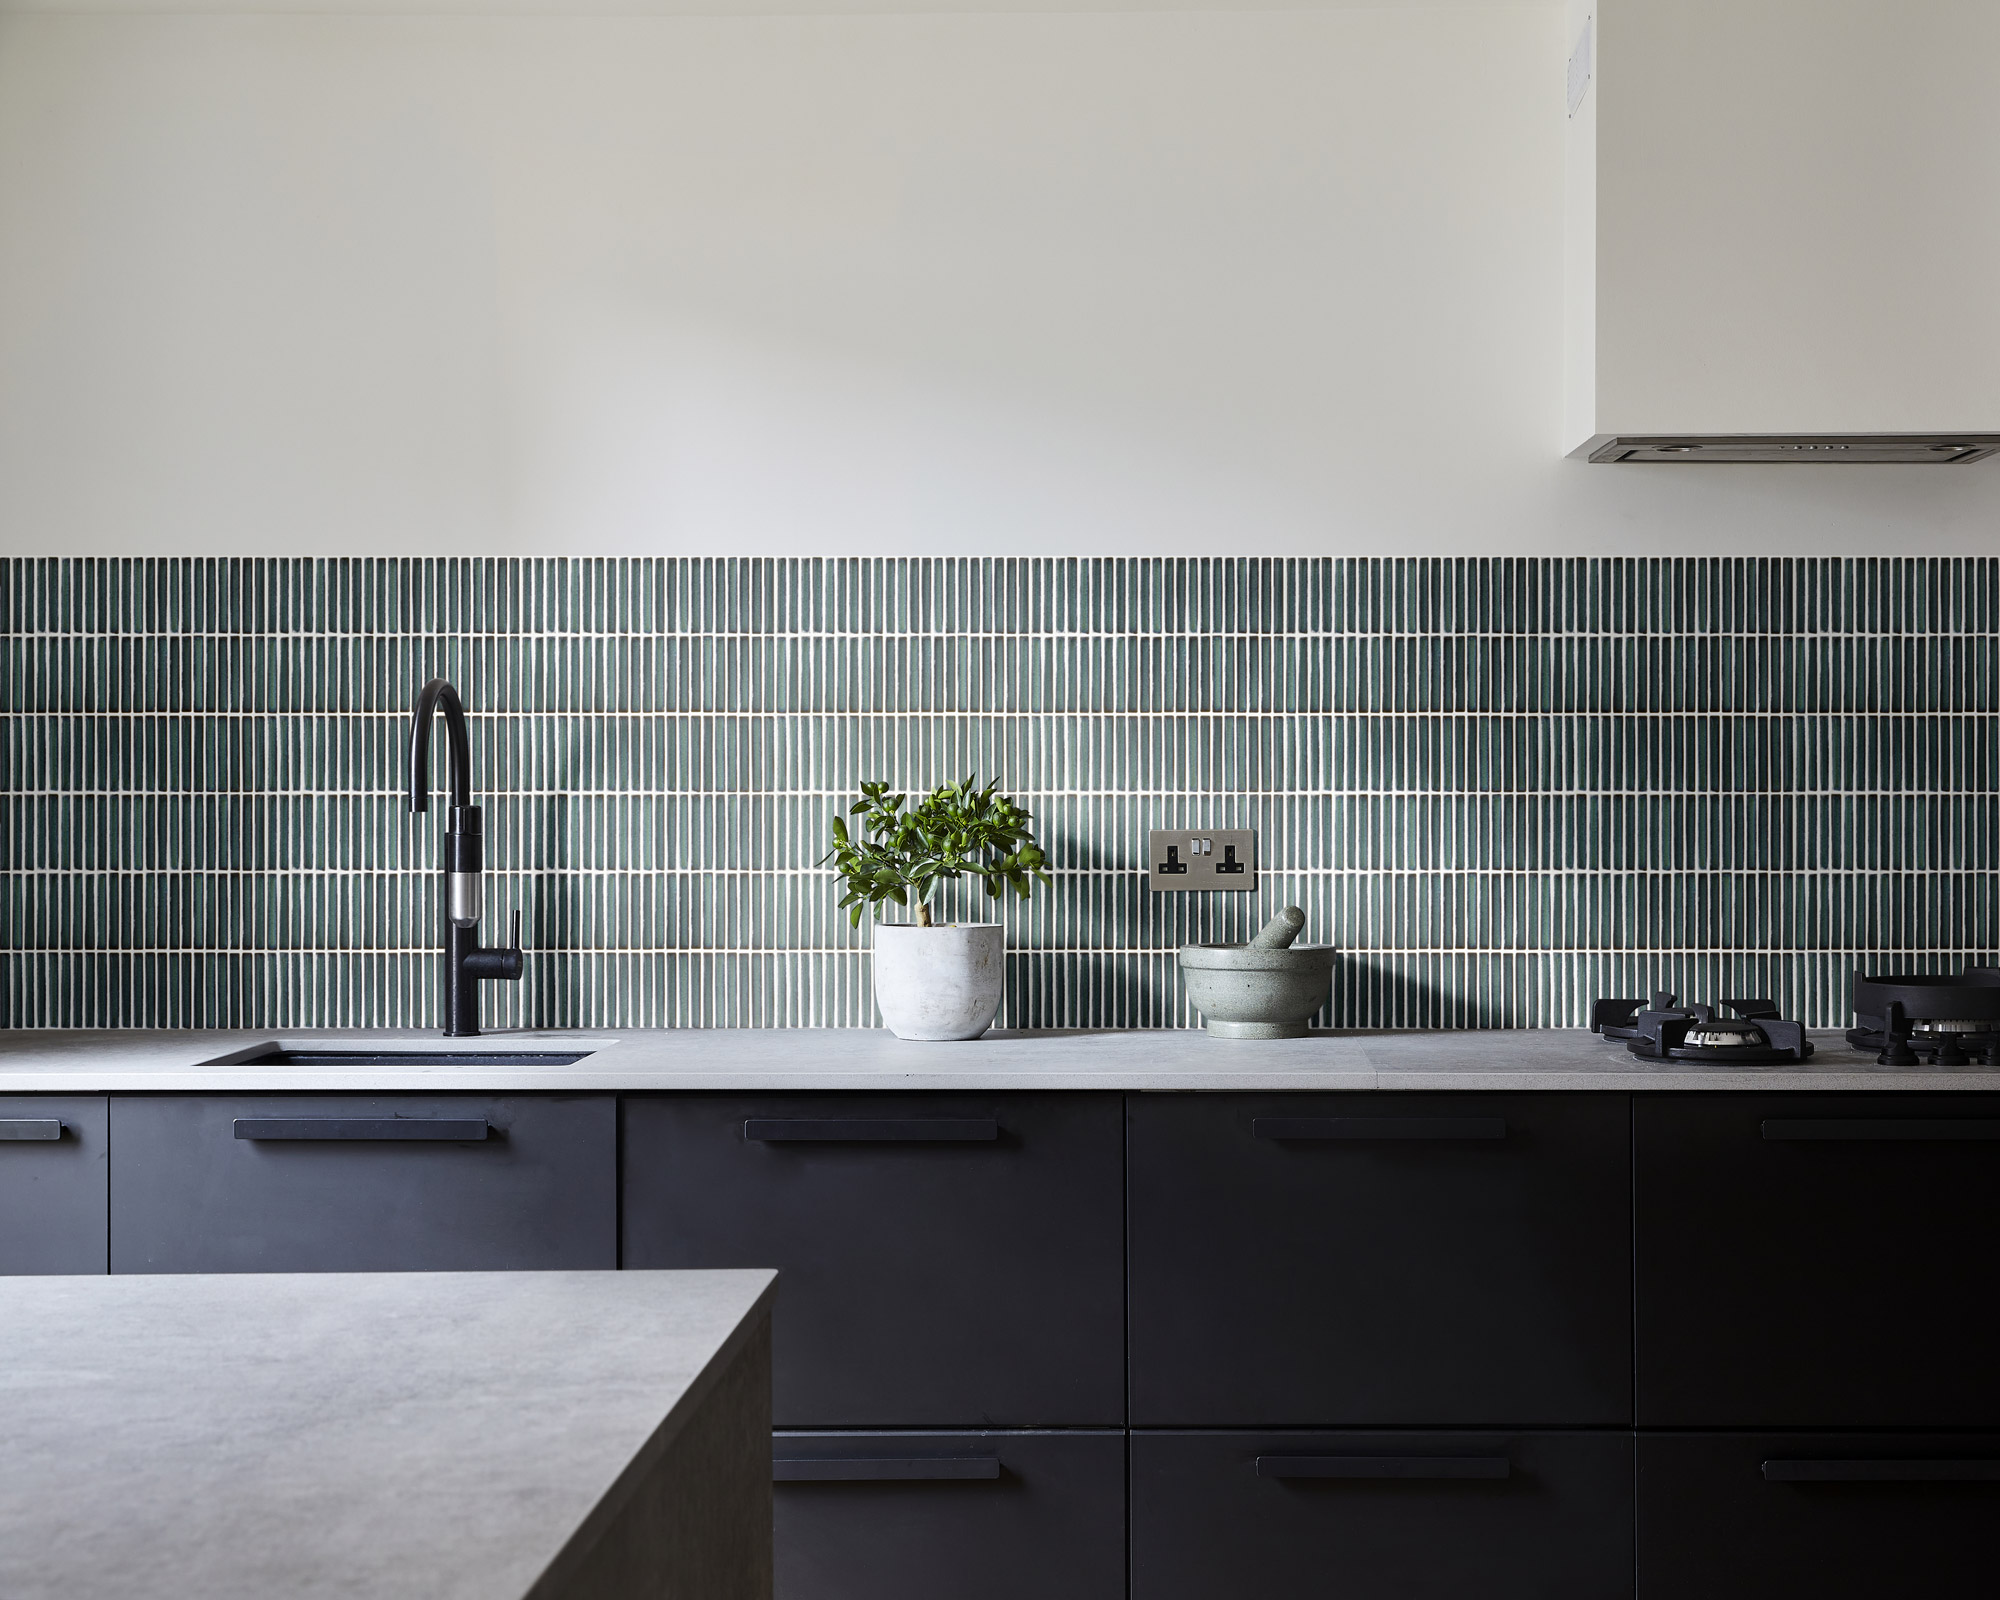 Kitchen Tile Costs Which Type Is Best, How To Choose The Right Tile For Kitchen